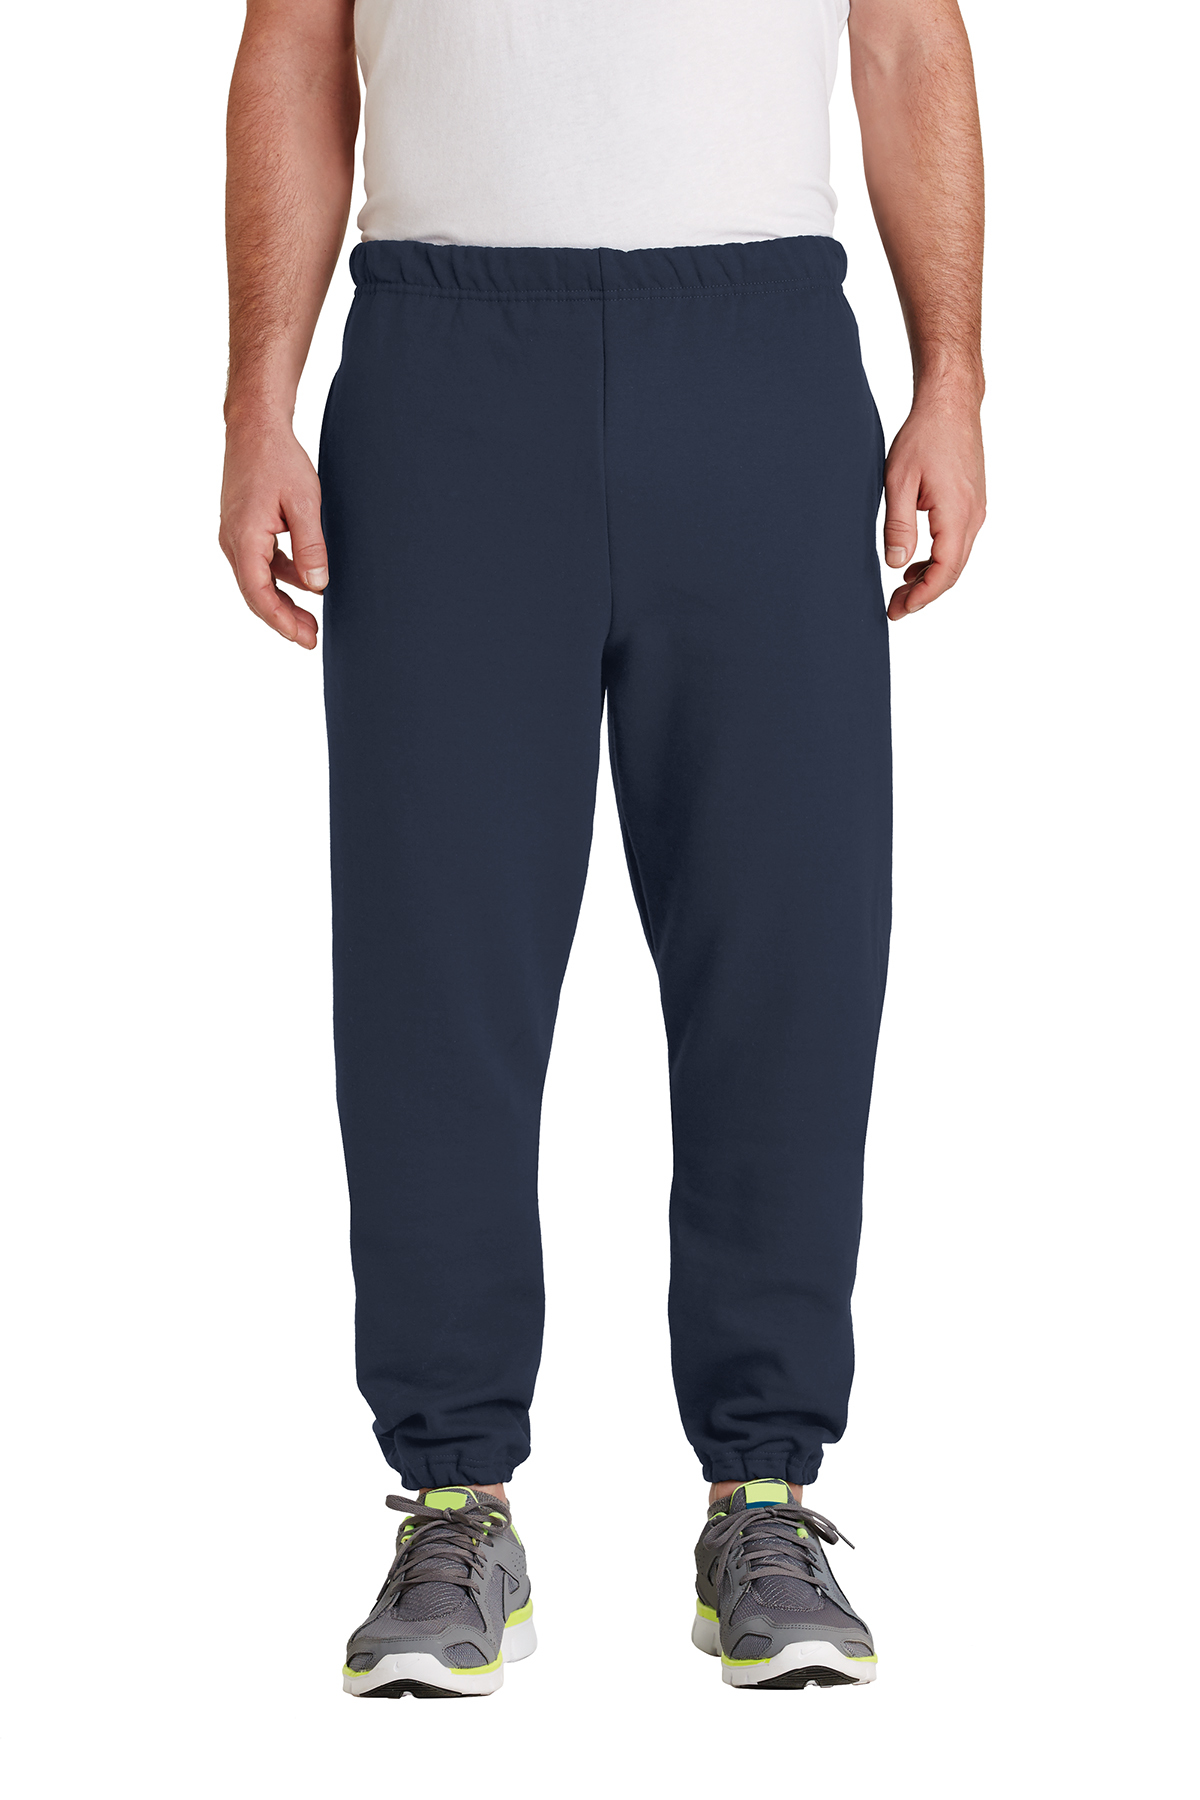 Jerzees Super Sweats NuBlend - Sweatpant with Pockets | Product ...